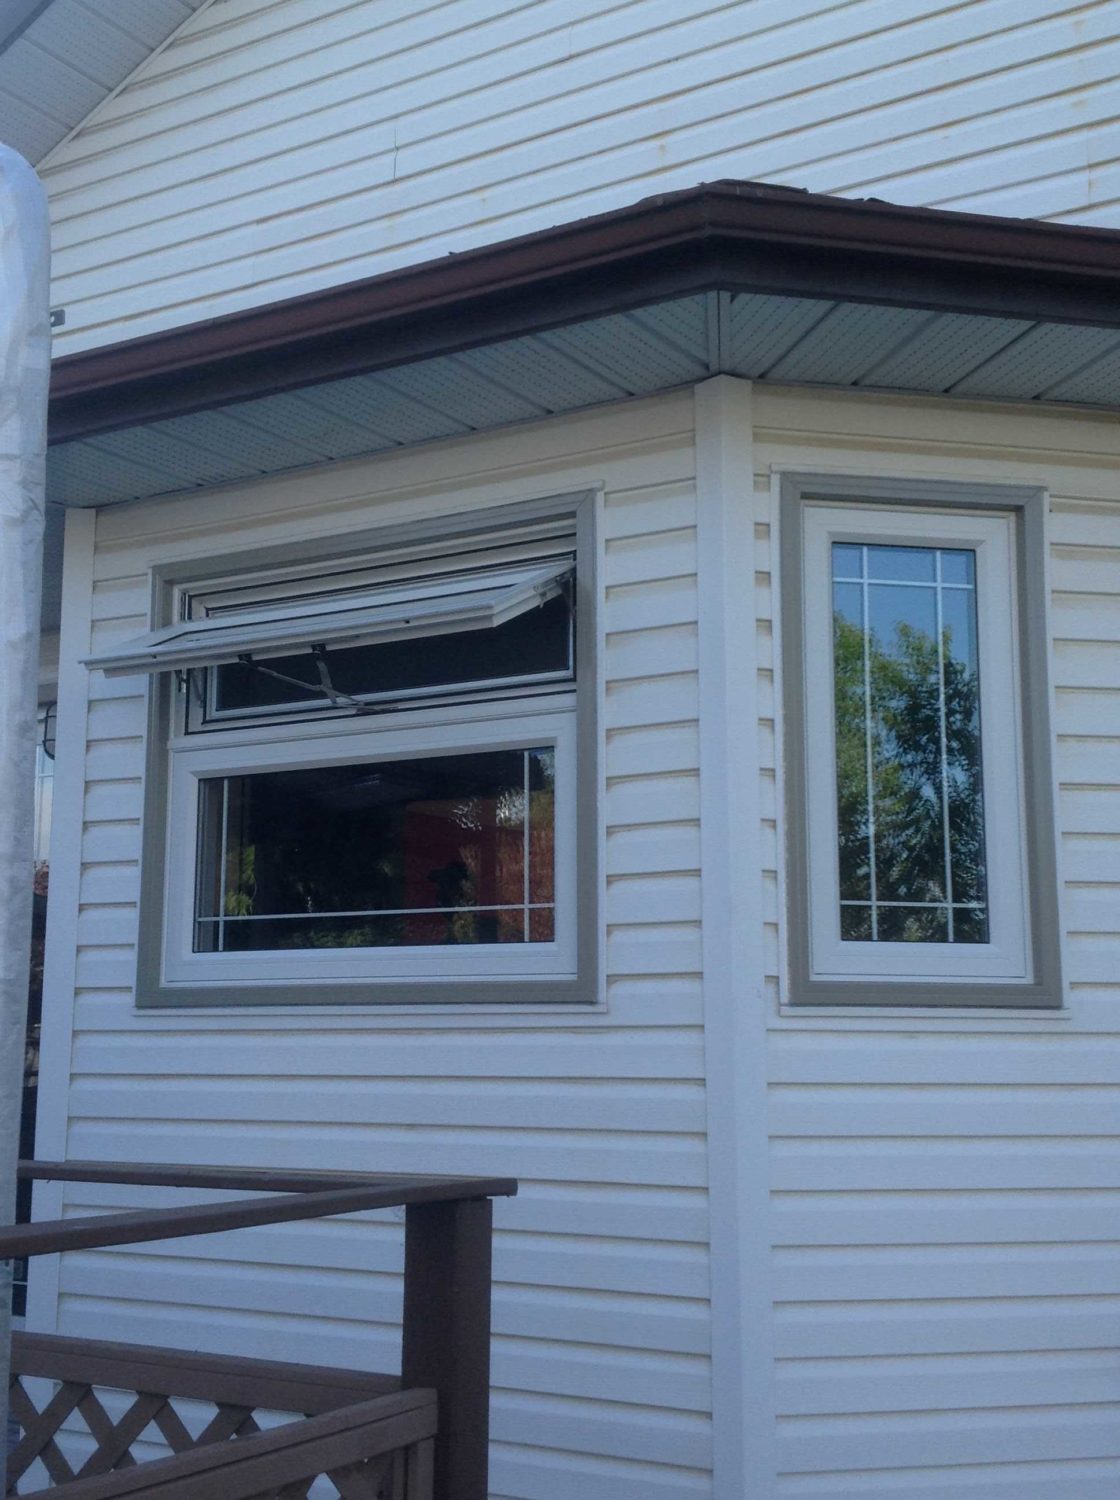 https://www.ecolinewindows.ca/wp-content/uploads/2015/04/Awning_Window_Over_Picture_Window.jpg